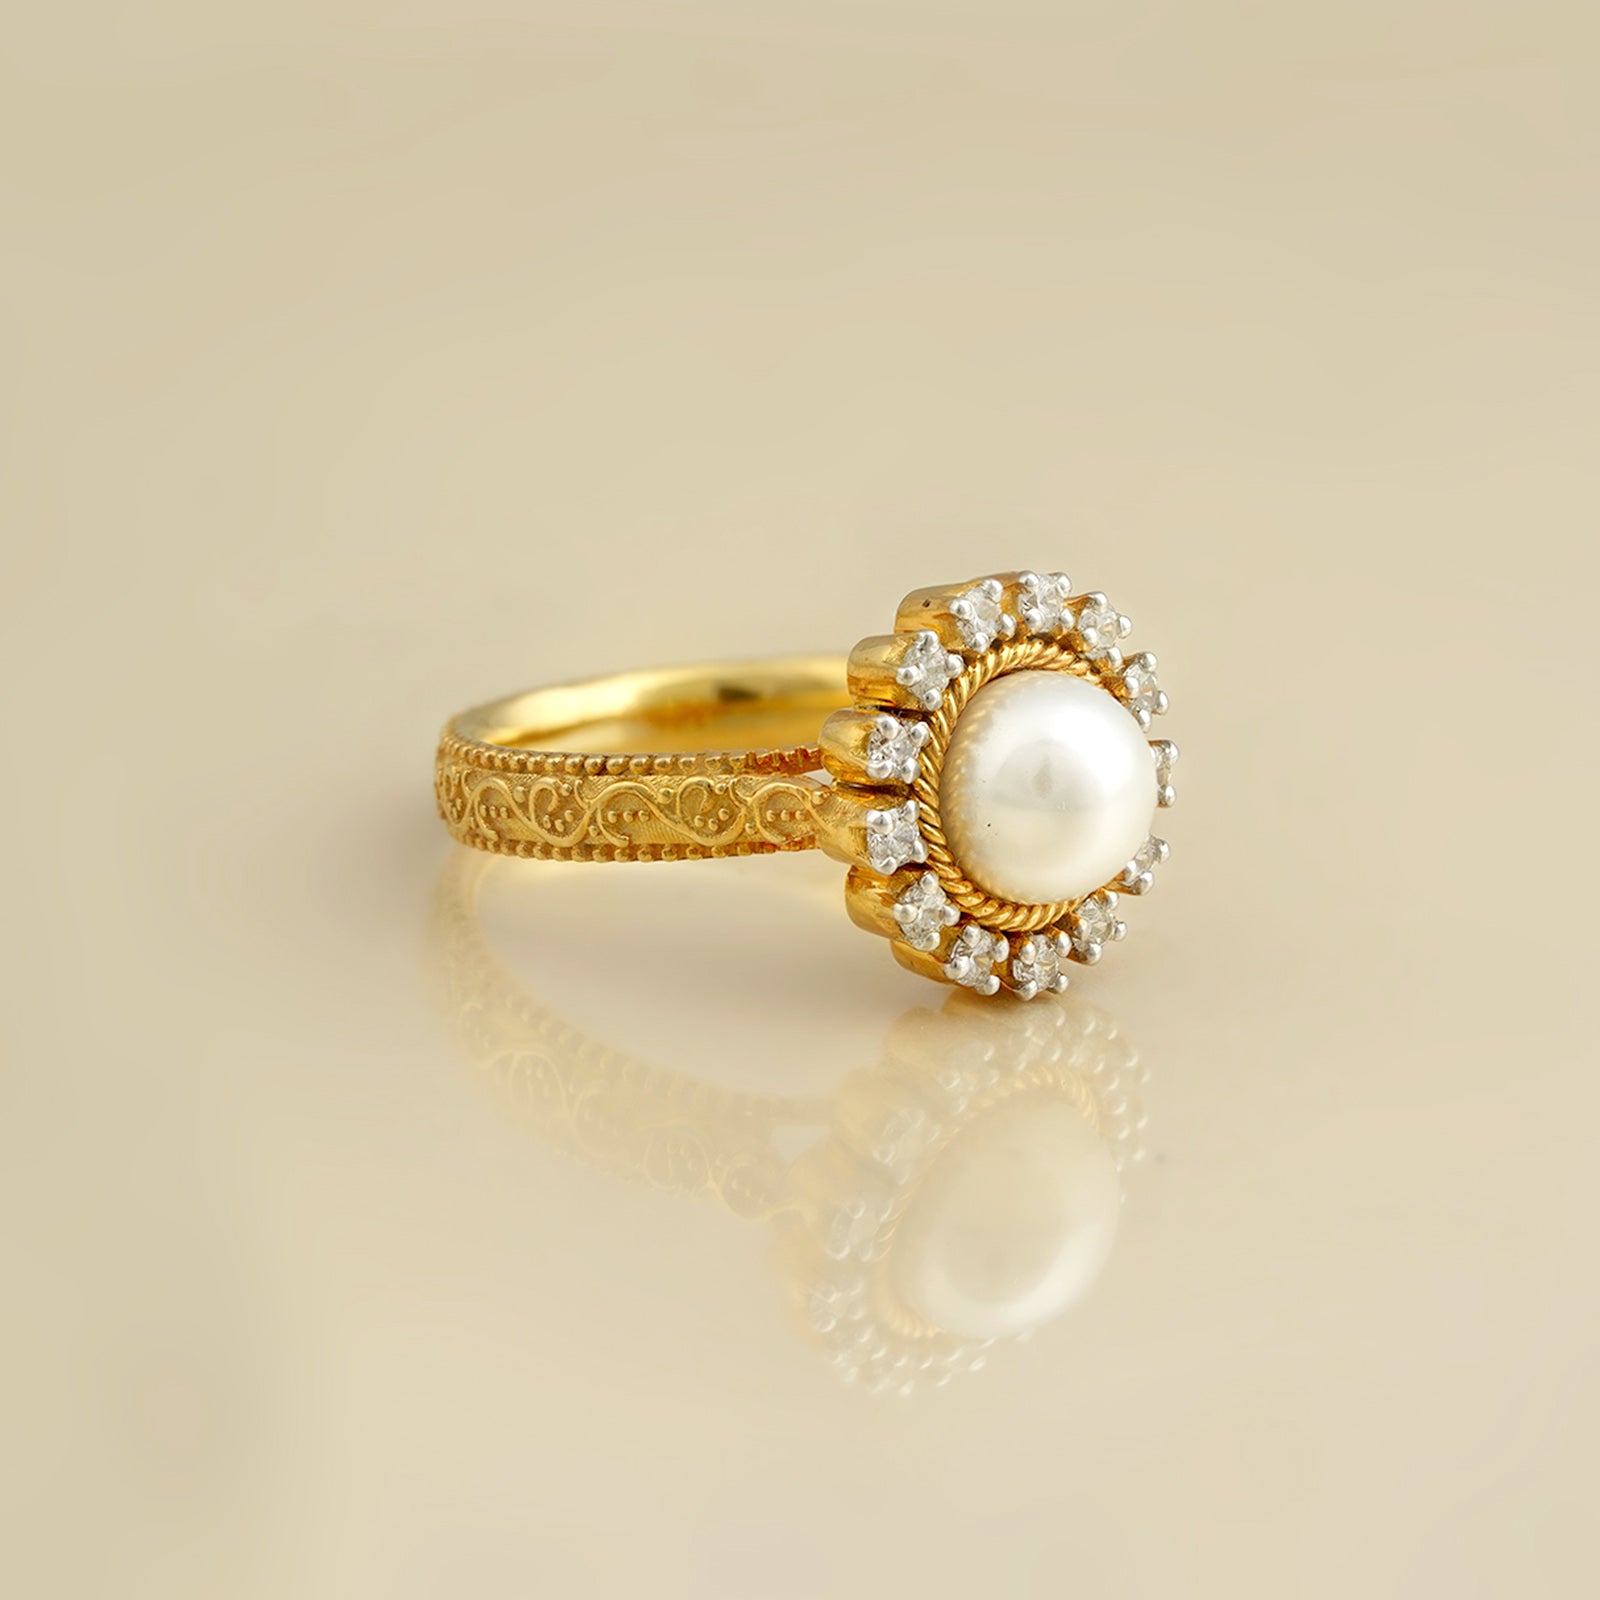 PC Jeweller - The Mukta Gold Ring is a rare beauty which... | Facebook